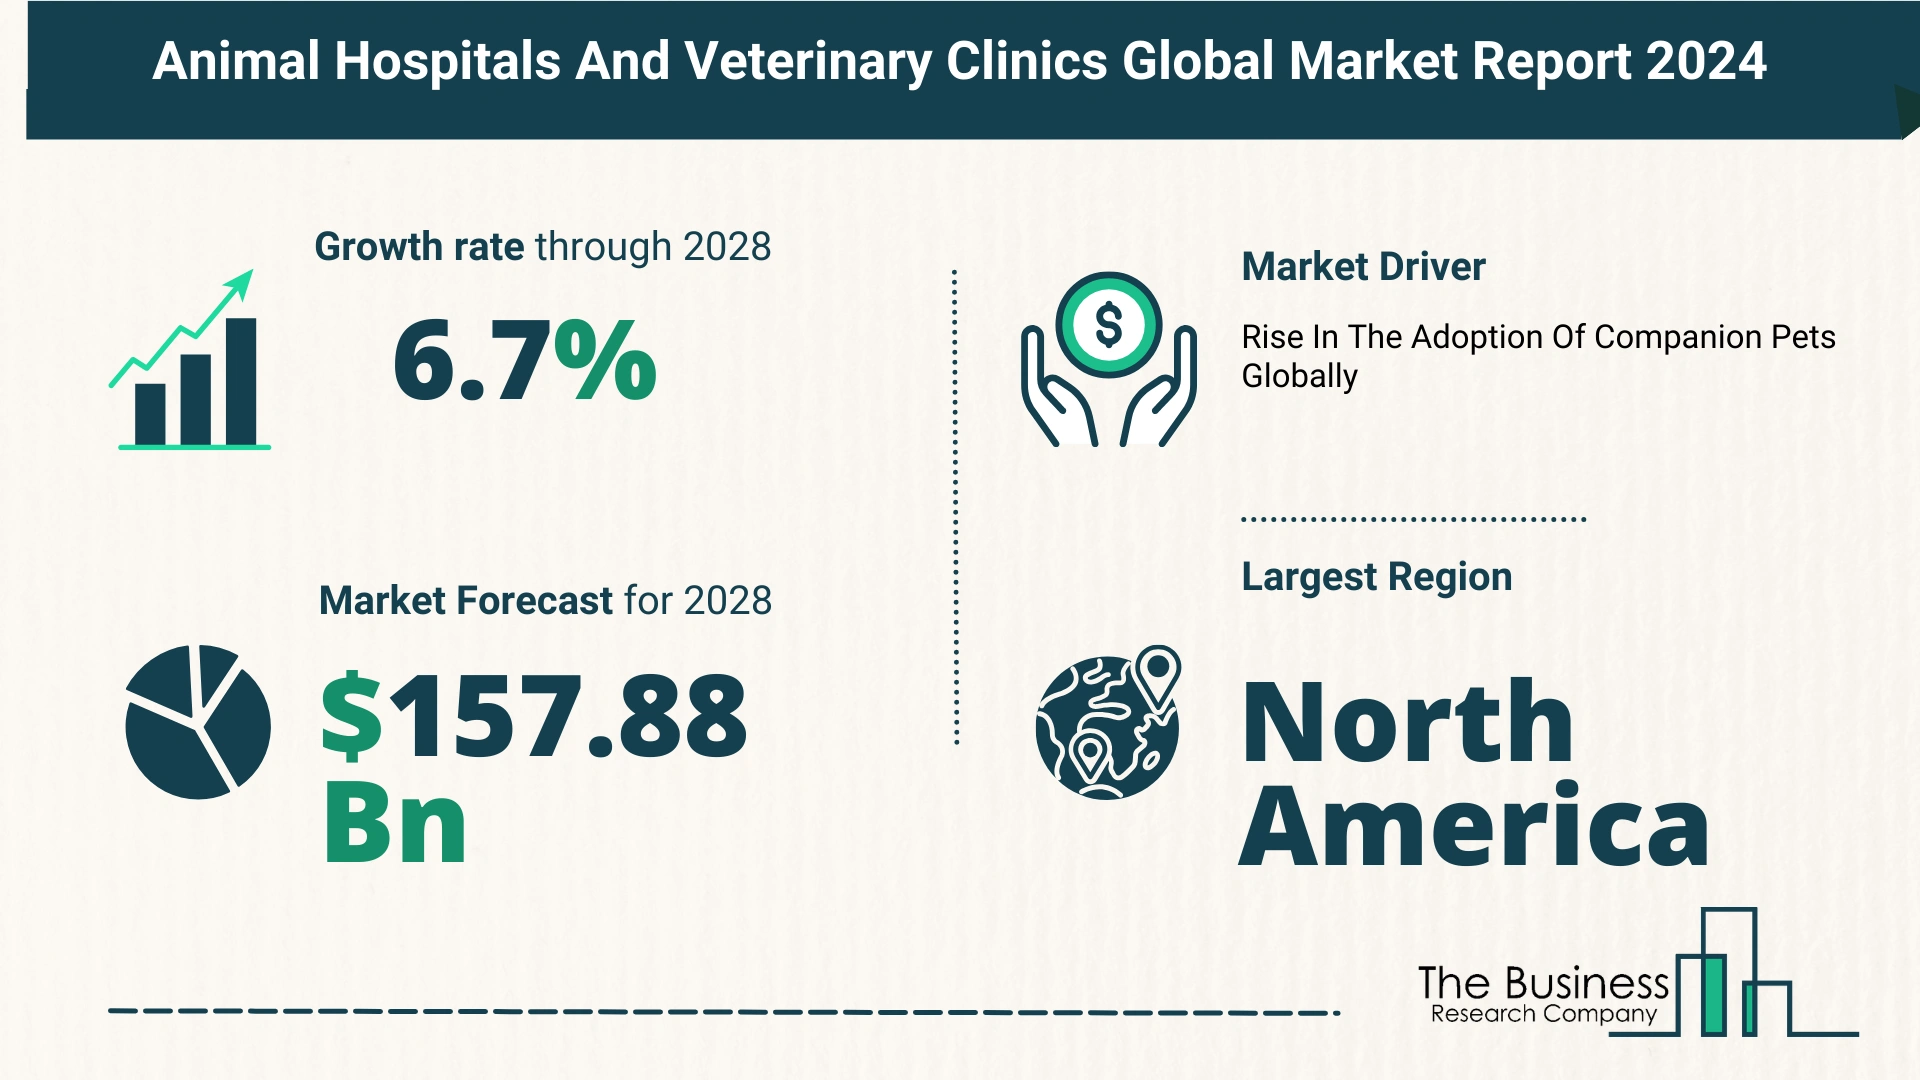 Top 5 Insights From The Animal Hospitals And Veterinary Clinics Market Report 2024